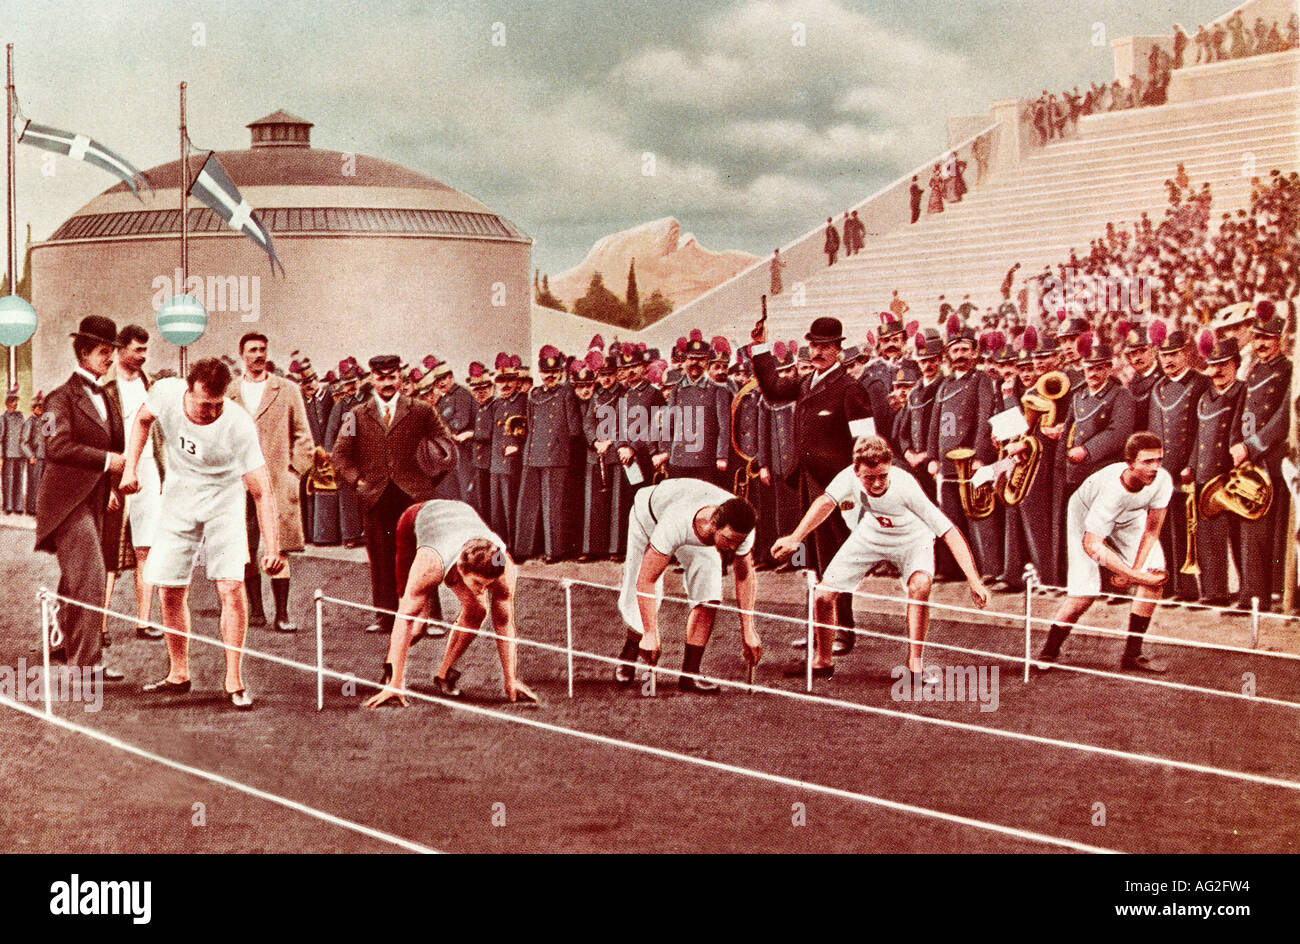 Sports, Olympic Games, finale, 100 metre run, Athens, Greece,1896, Stock Photo